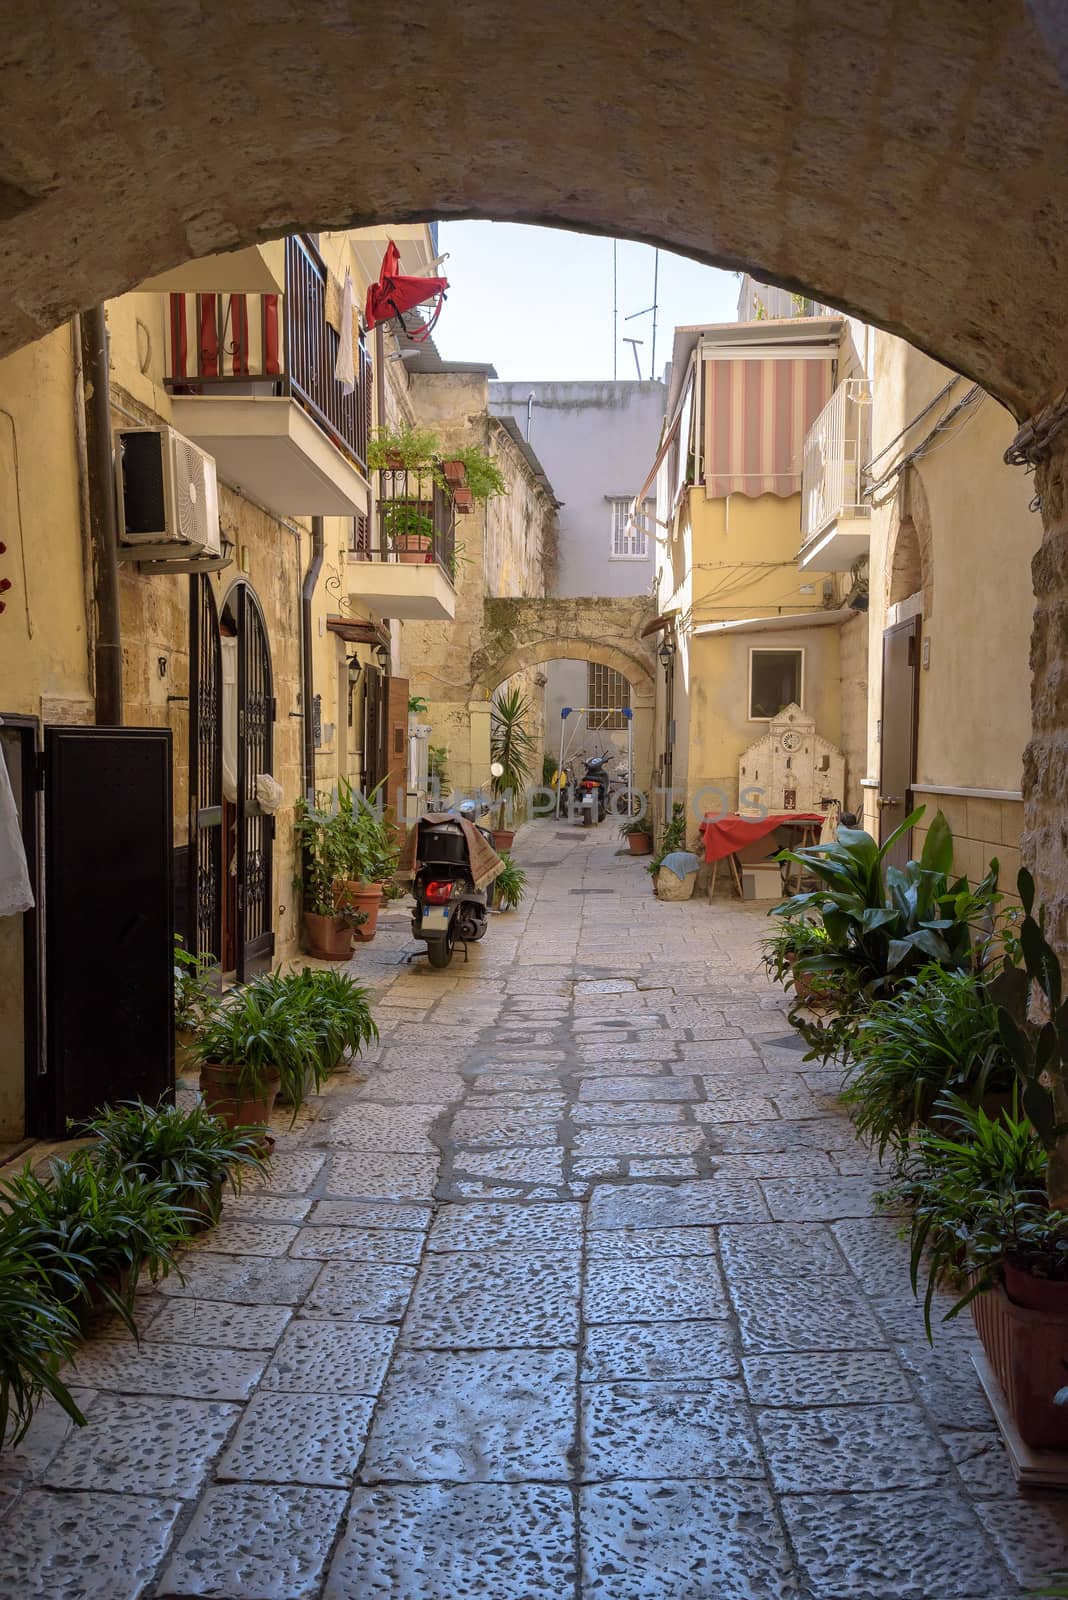 gate to the backyard in the old town of Bari, Apulia, Italy